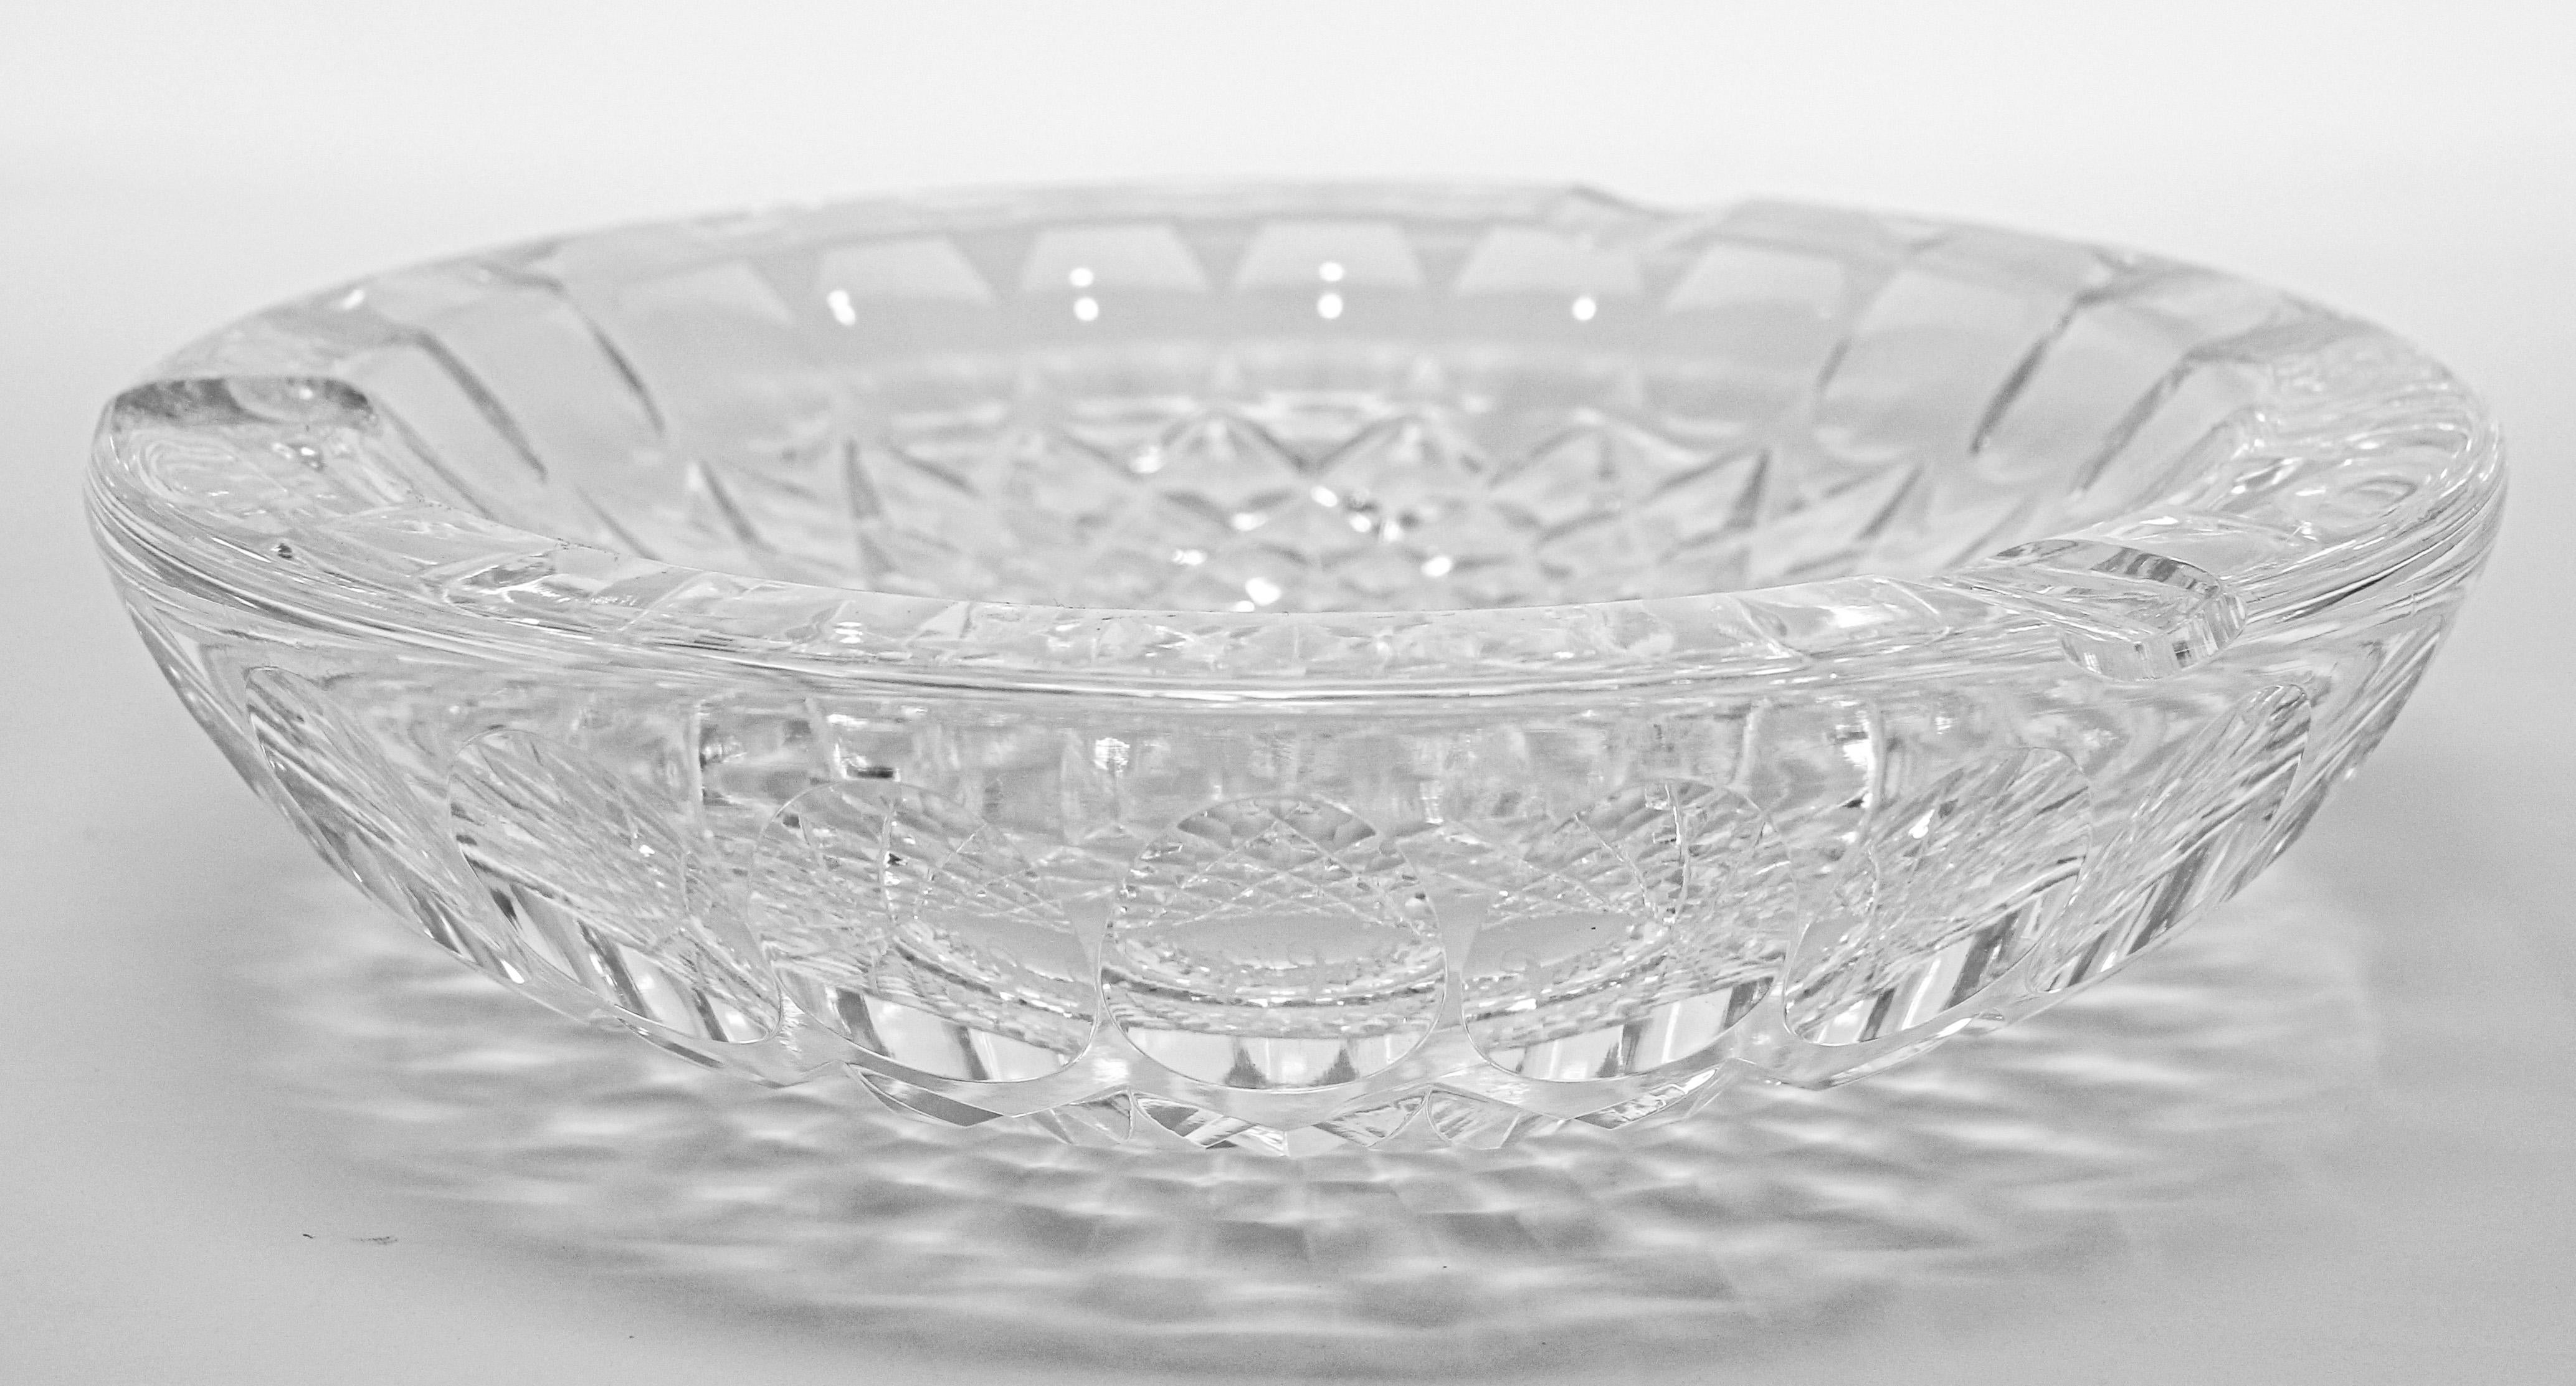 Beautiful cut crystal clear glass ashtray decorated with a monogram design.
Heavy crystal shines like a diamond.
Wonderful fashionable glass multifaceted ashtray or decorative object with 